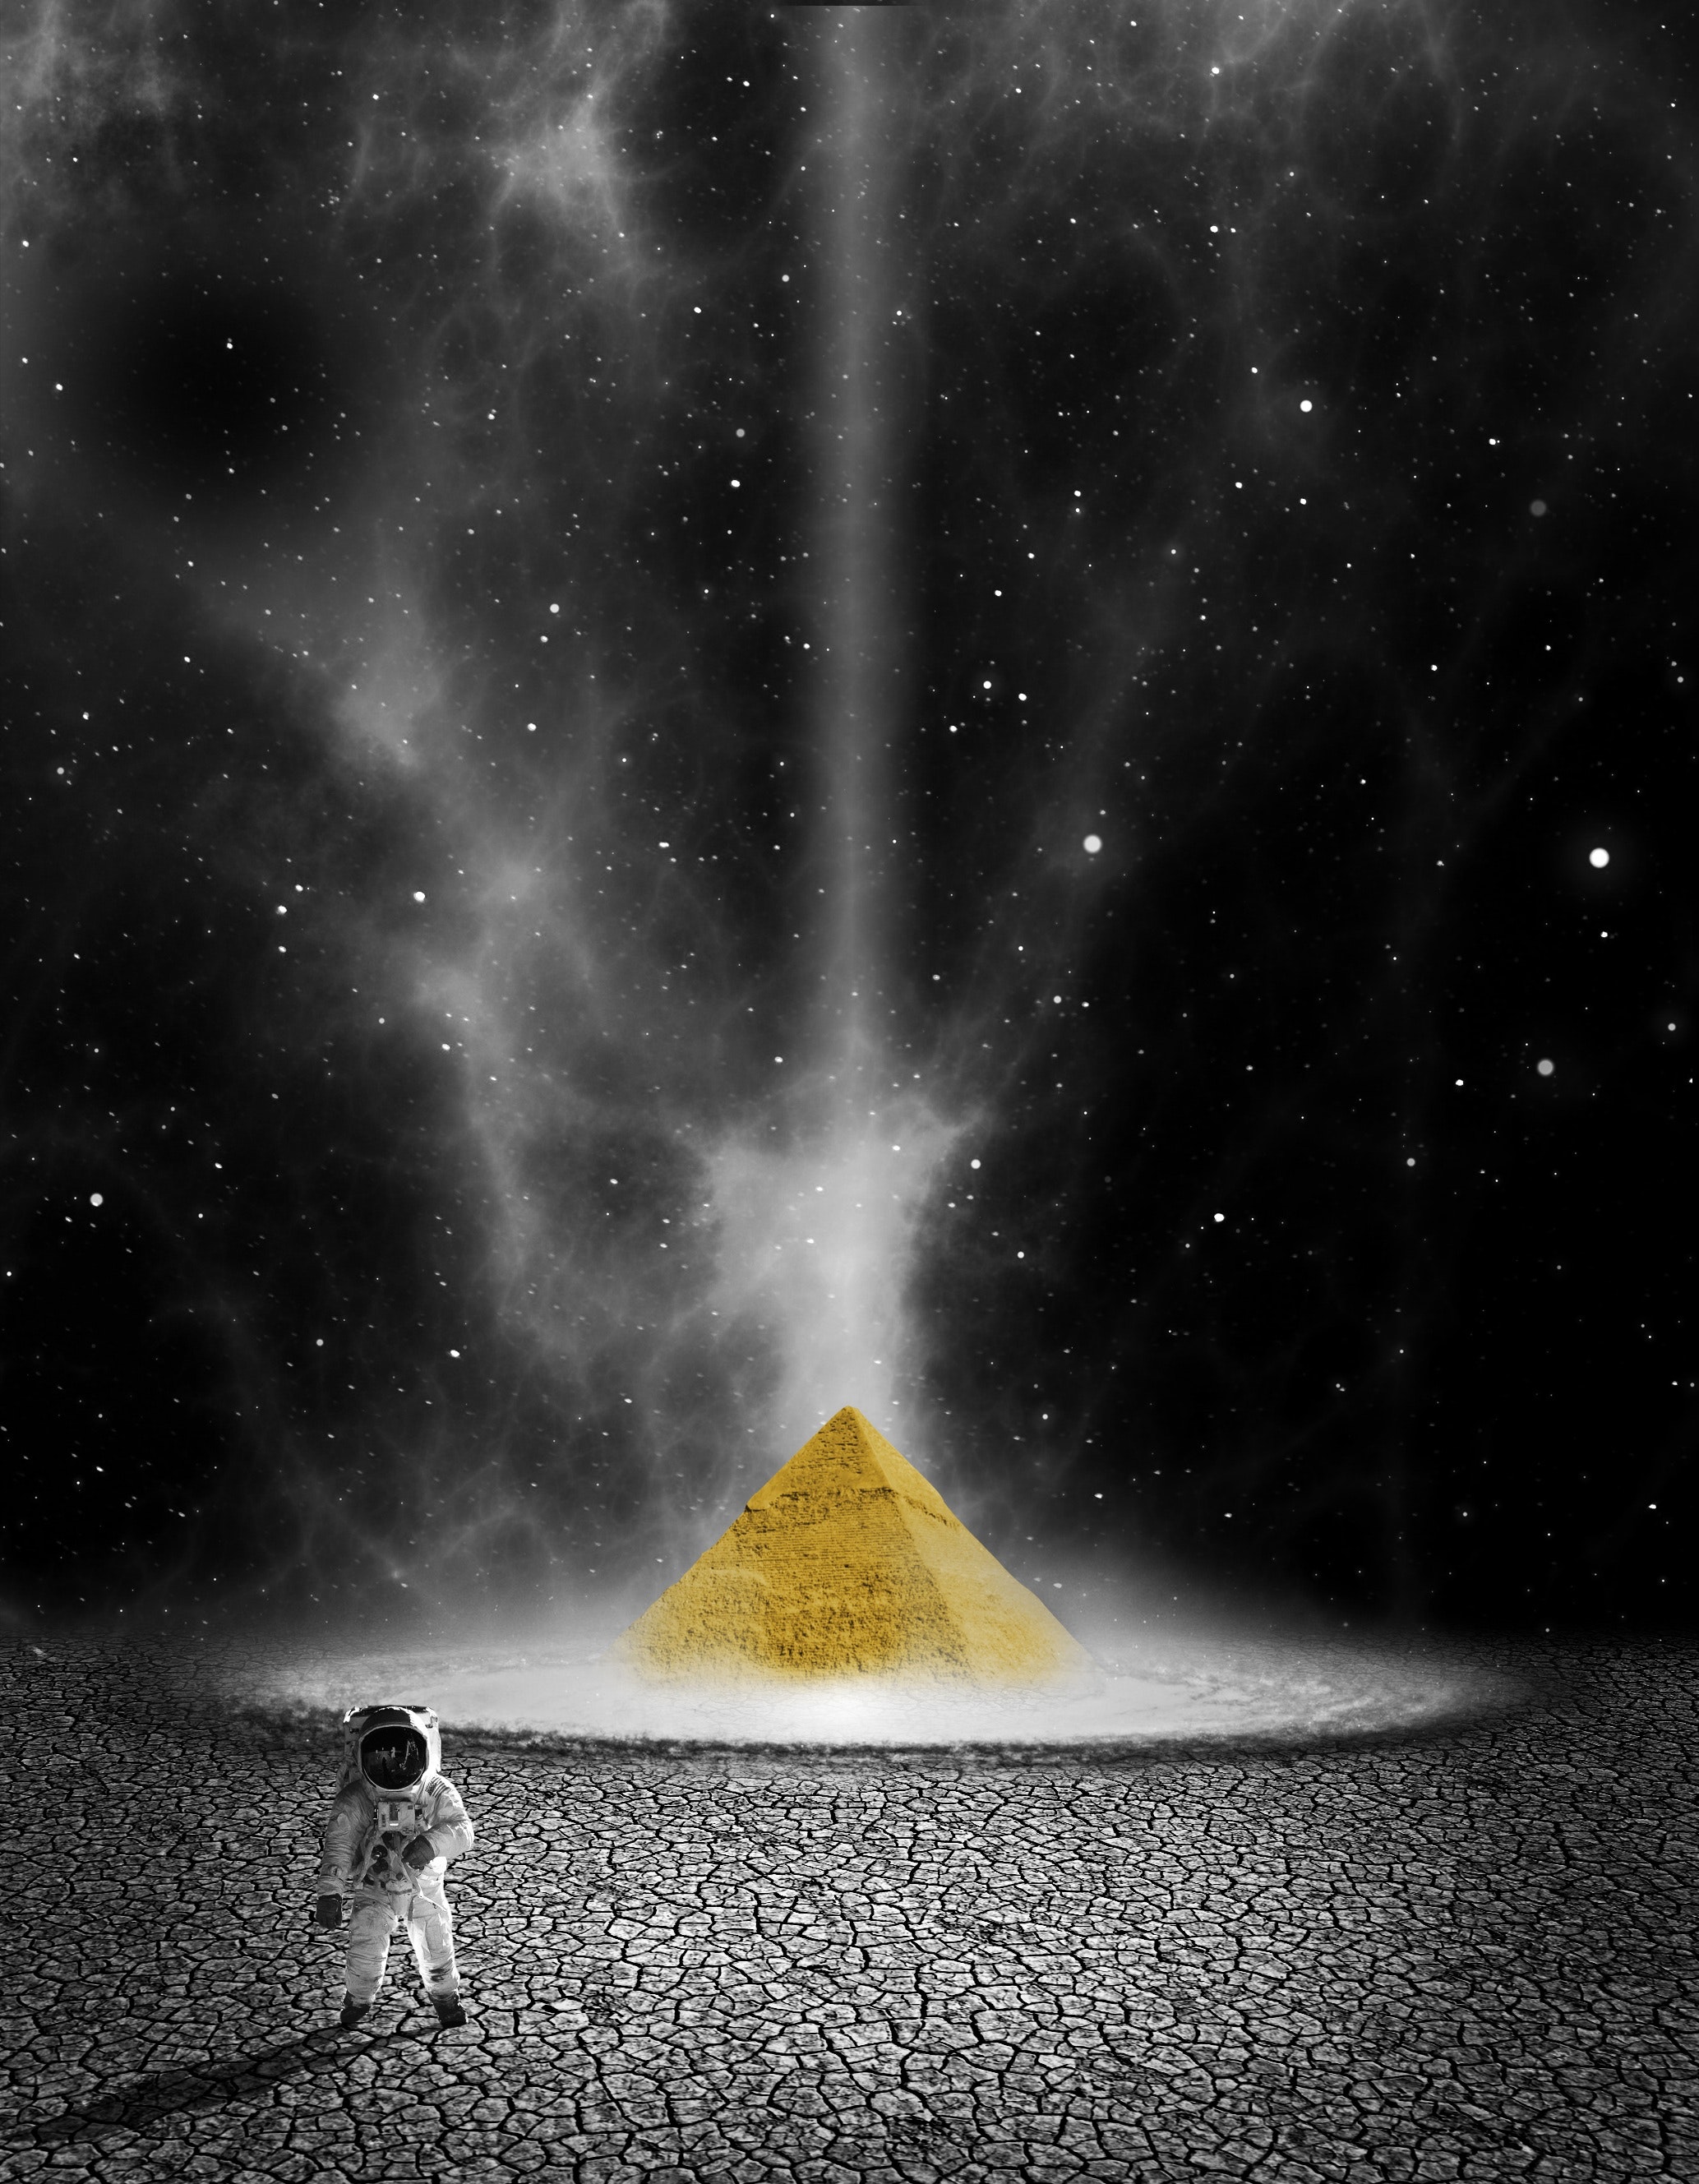 Astronaut Standing Behind Egypt Pyramid Selective Color Photography ...